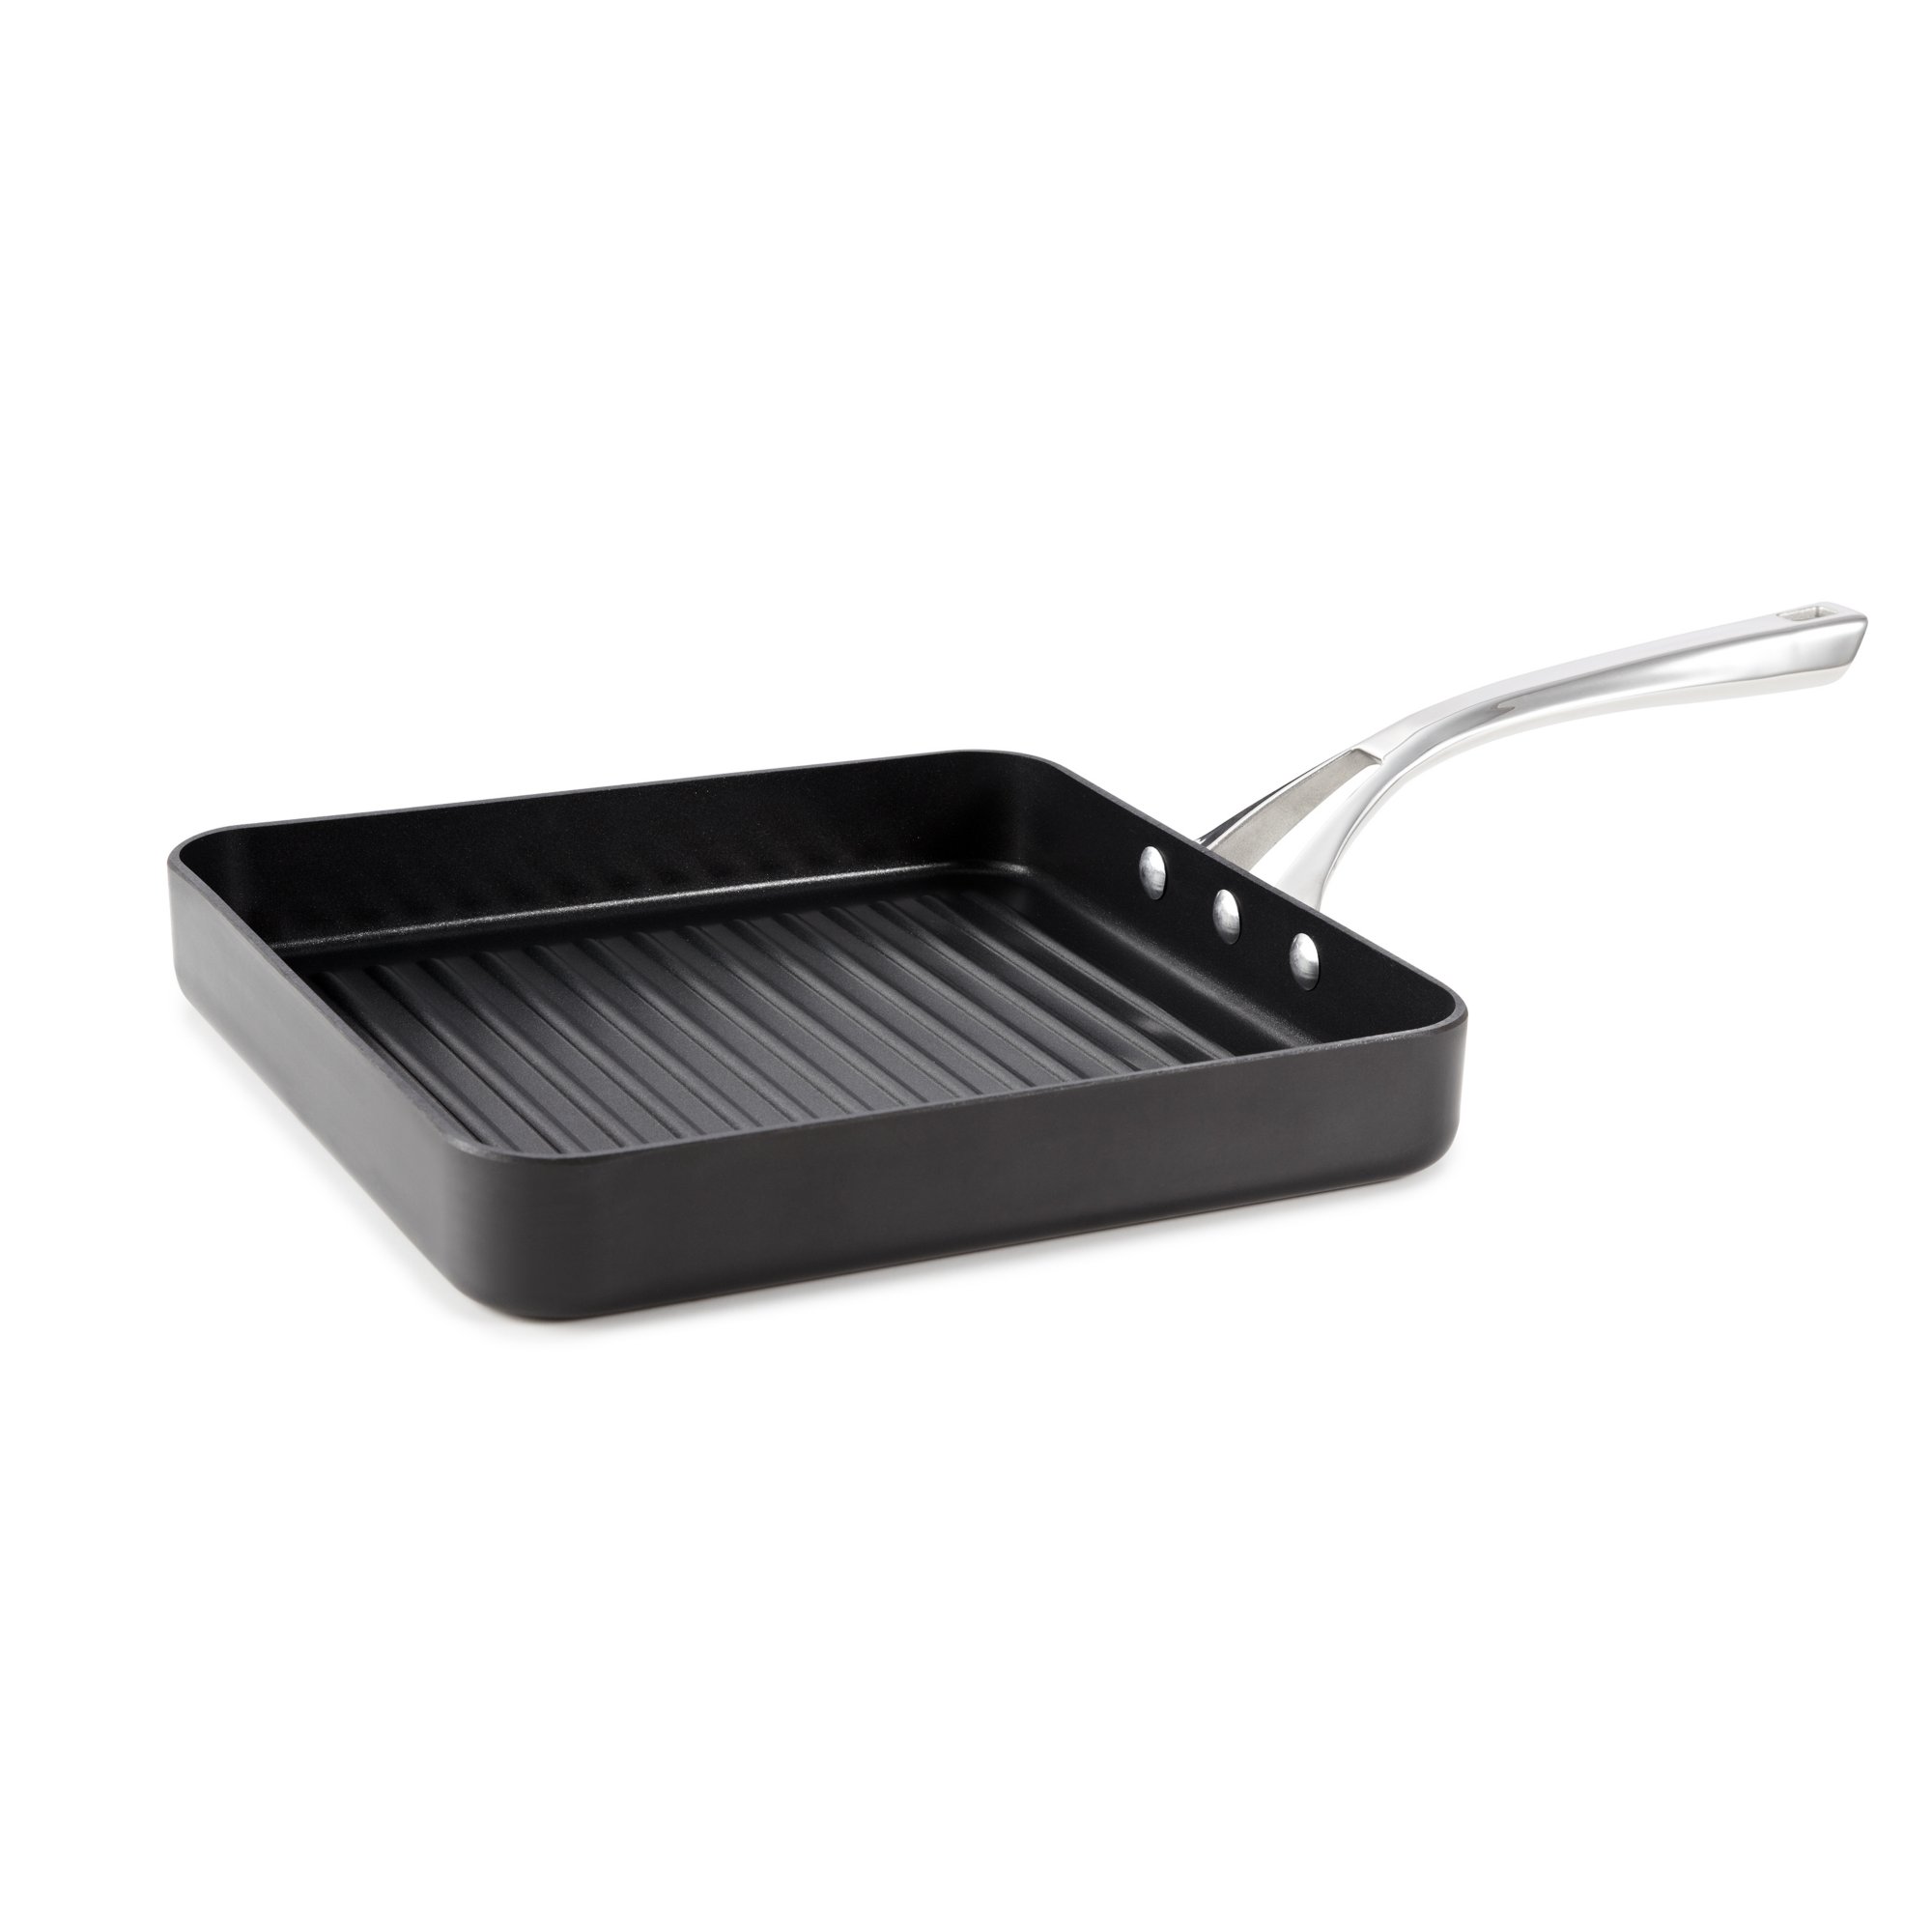 Calphalon Elite Nonstick Square Grill Pan - household items - by owner -  housewares sale - craigslist